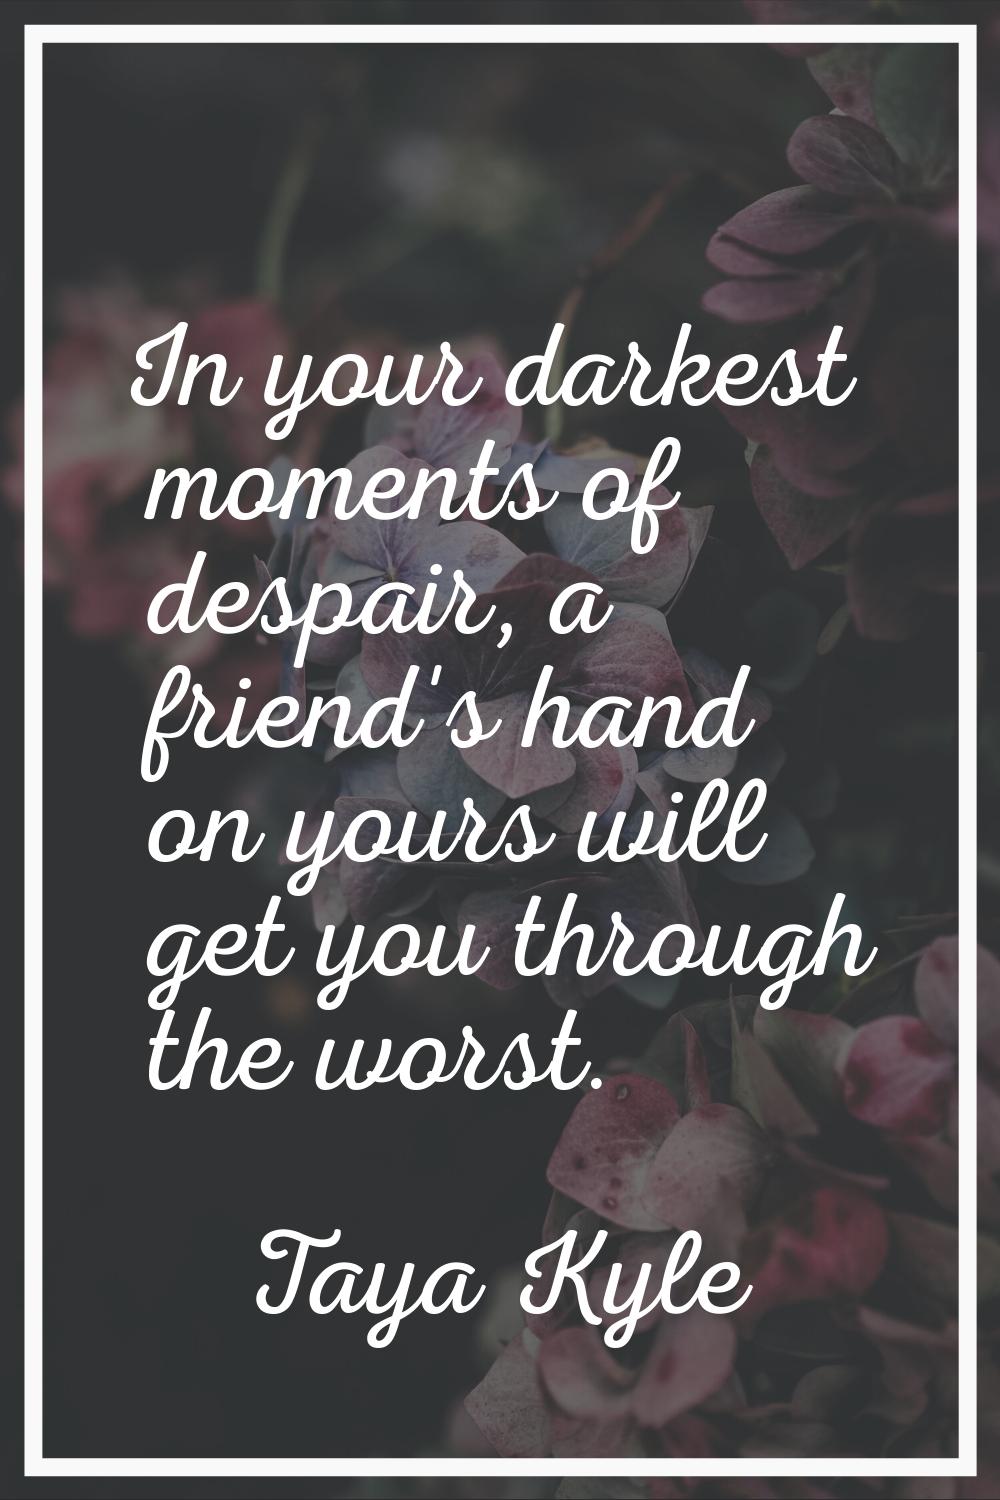 In your darkest moments of despair, a friend's hand on yours will get you through the worst.